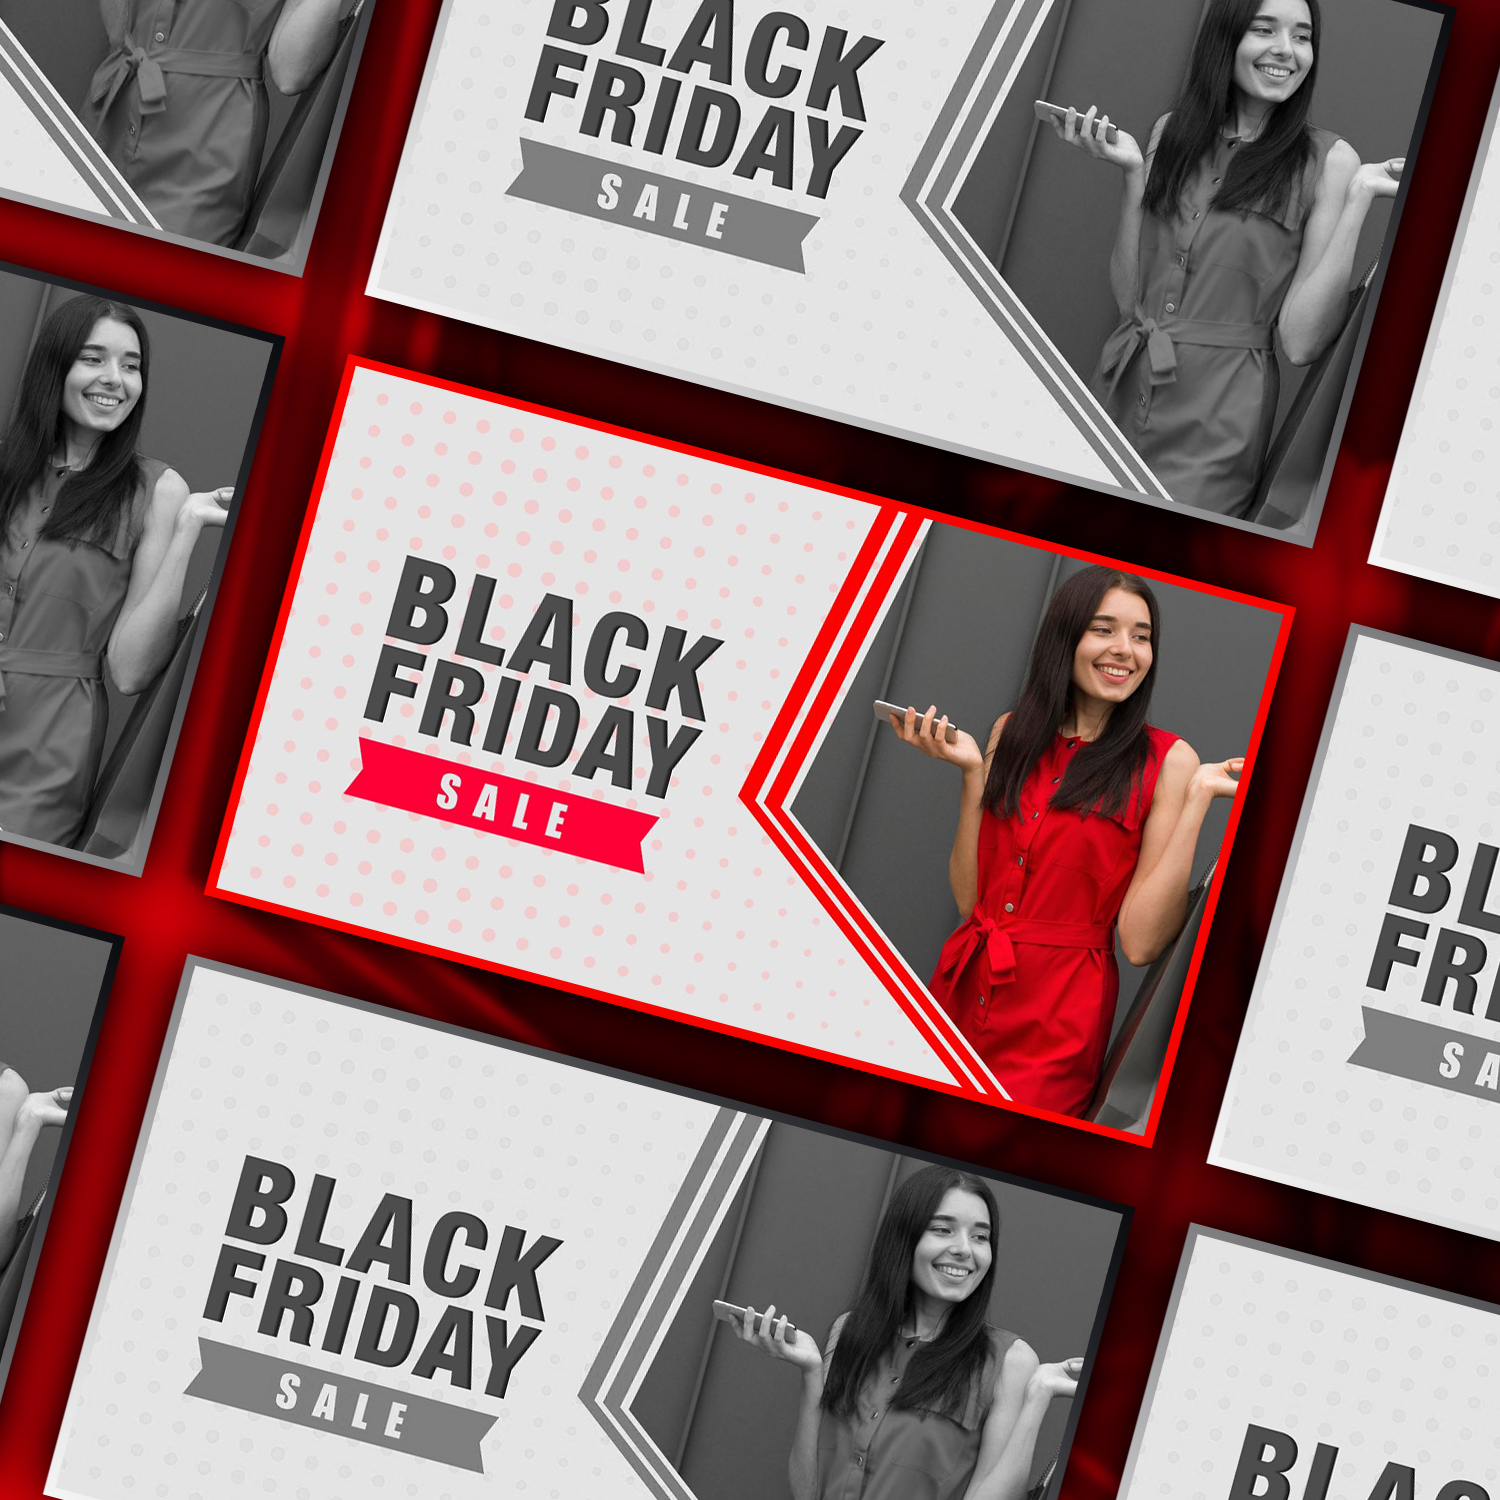 Images with corporate black friday sale banner.